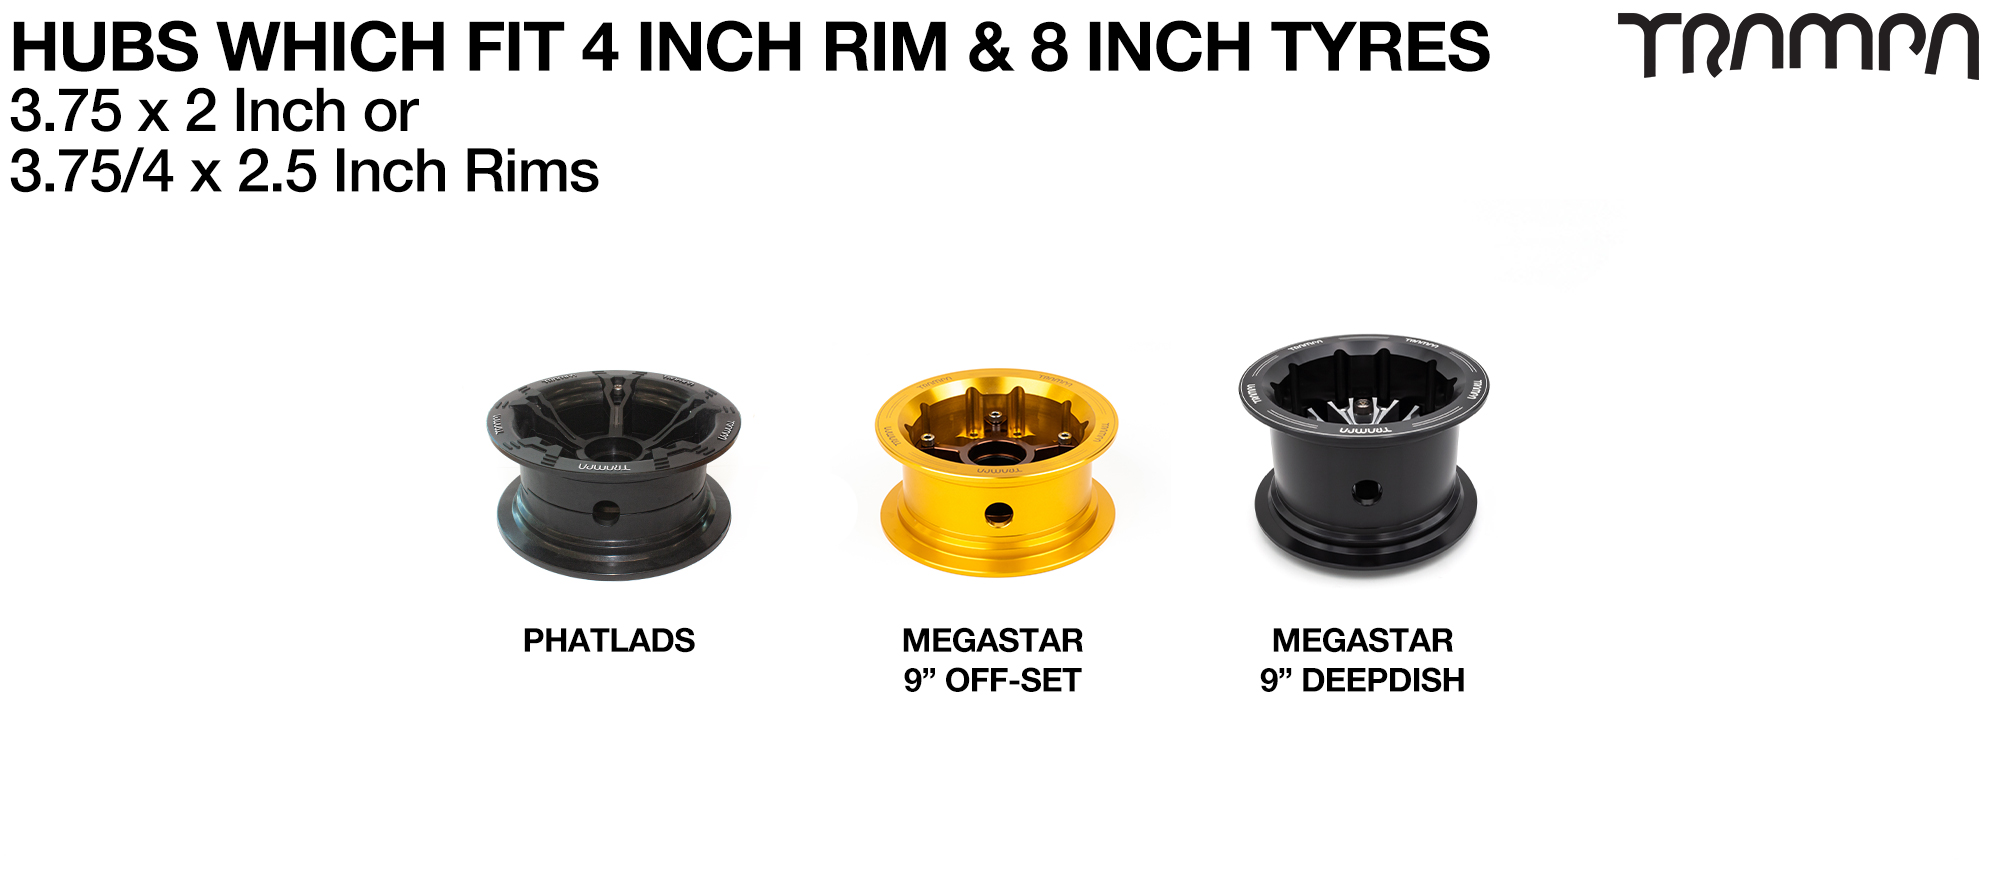 Set of 4 PRIMO POWERPLAY 8 Inch Tyre measure 4x 2.5x 8.5 Inch or 220x75mm with 4 inch rim fits all 4 inch Hubs 